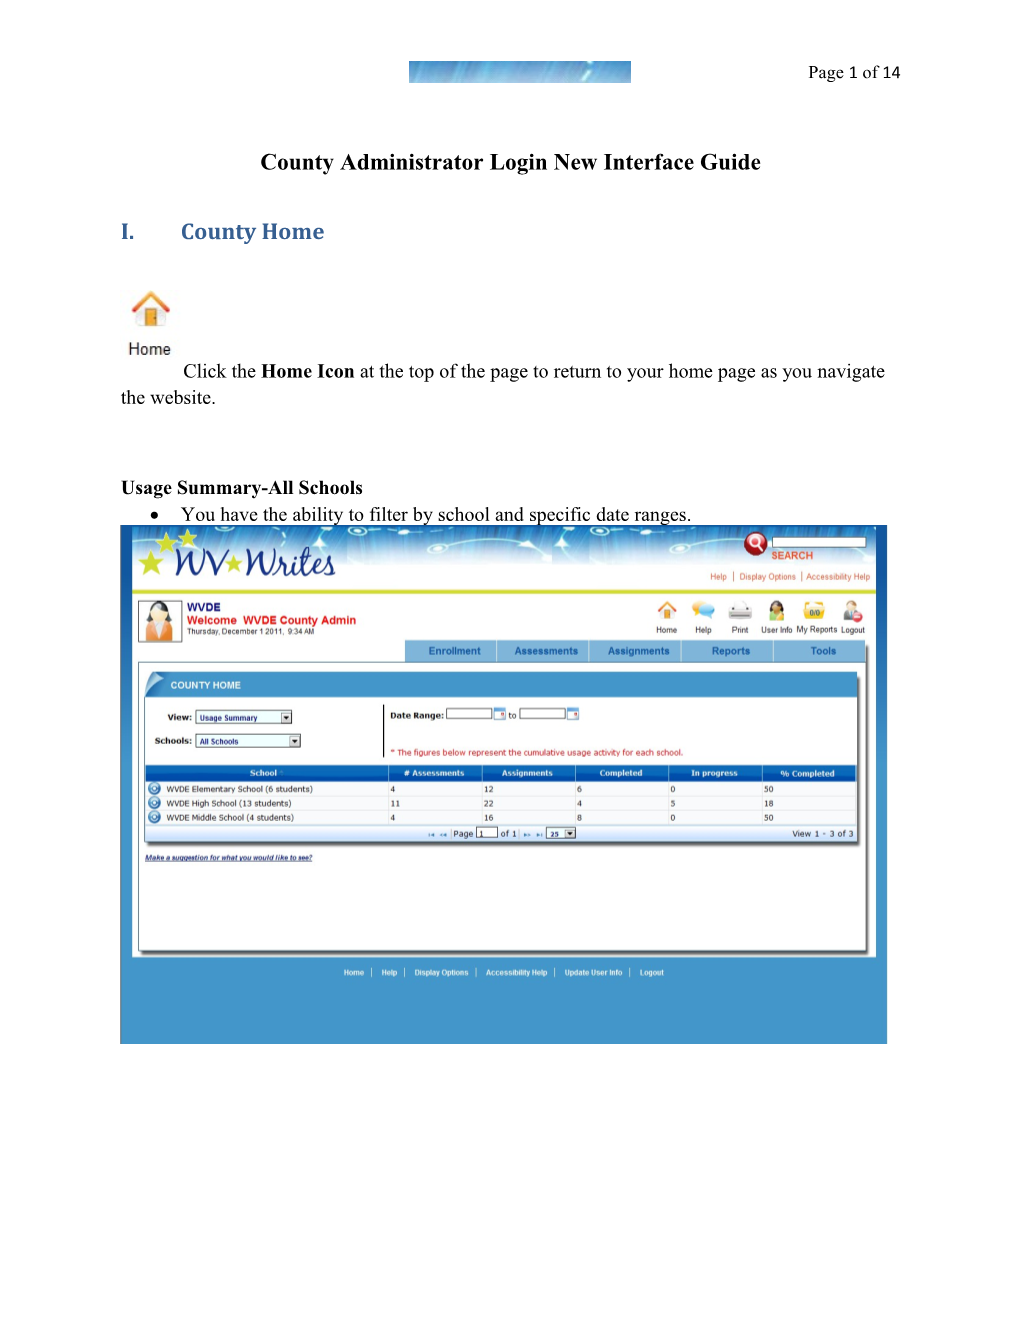 County Administrator Login New Interface Guide